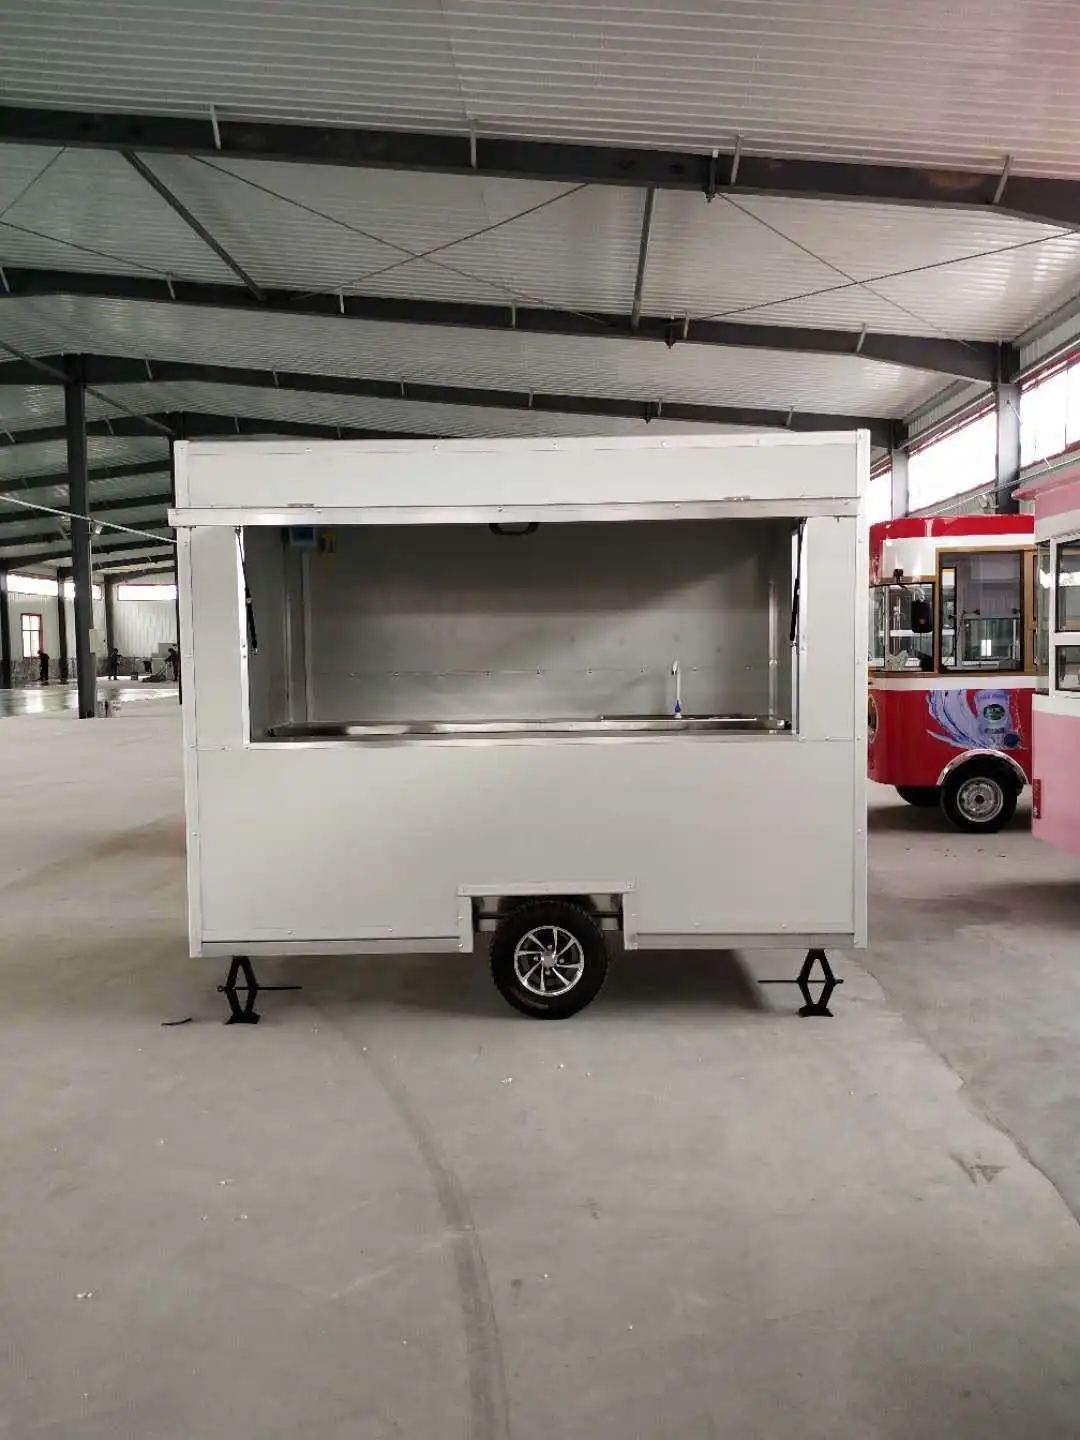 Fast Food Mobile Kitchen Trailer Rent Food Trailer Cheap Food Trailer Buy Fast Food Mobile Kitchen Trailer Rent Food Trailer Cheap Food Trailer Product On Alibaba Com